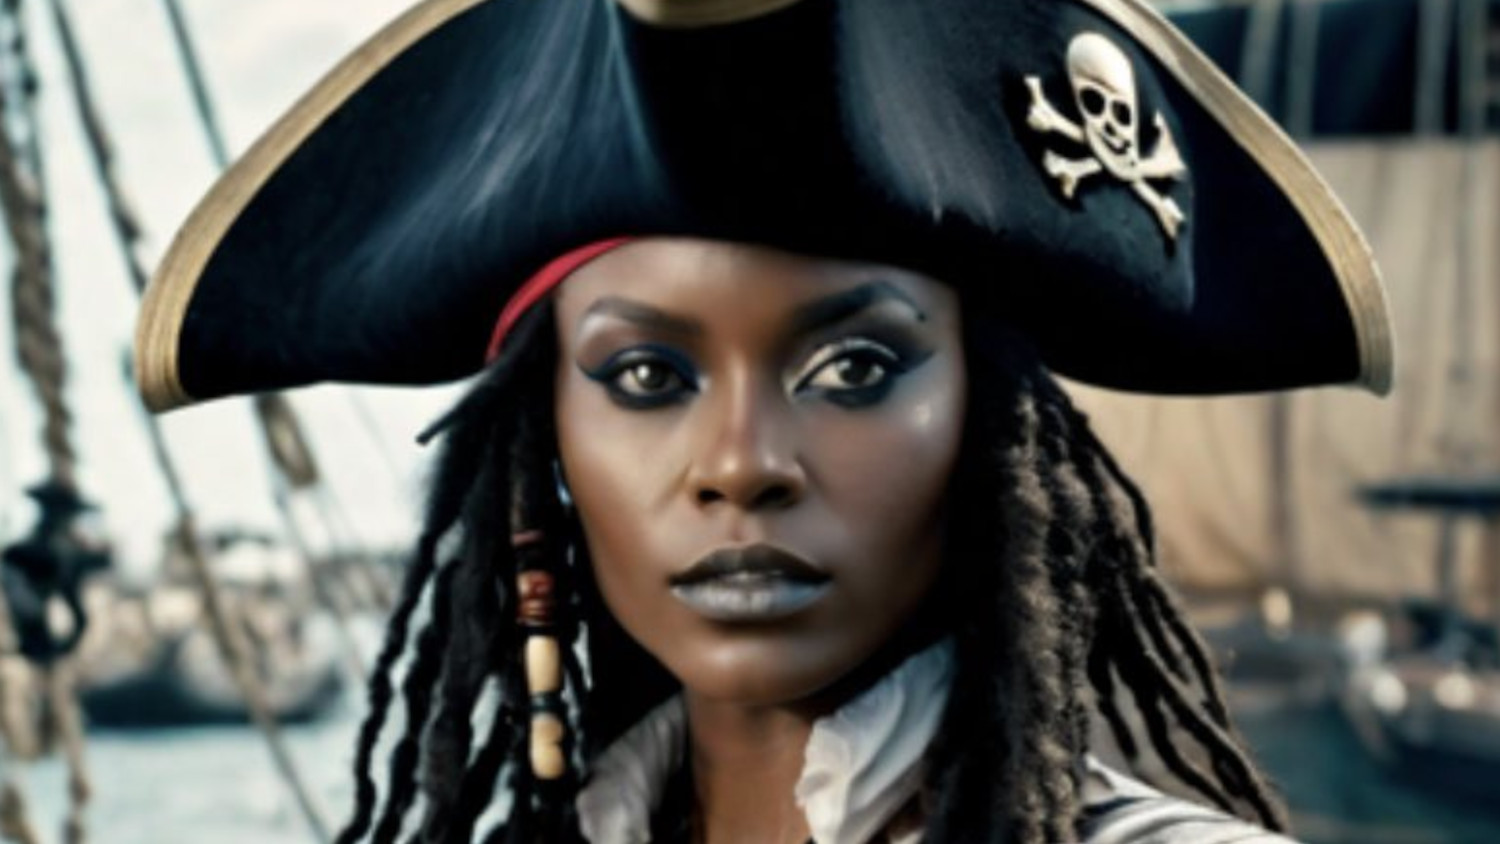 Pirates of the Caribbean Female Reboot Still Happening Says Producer